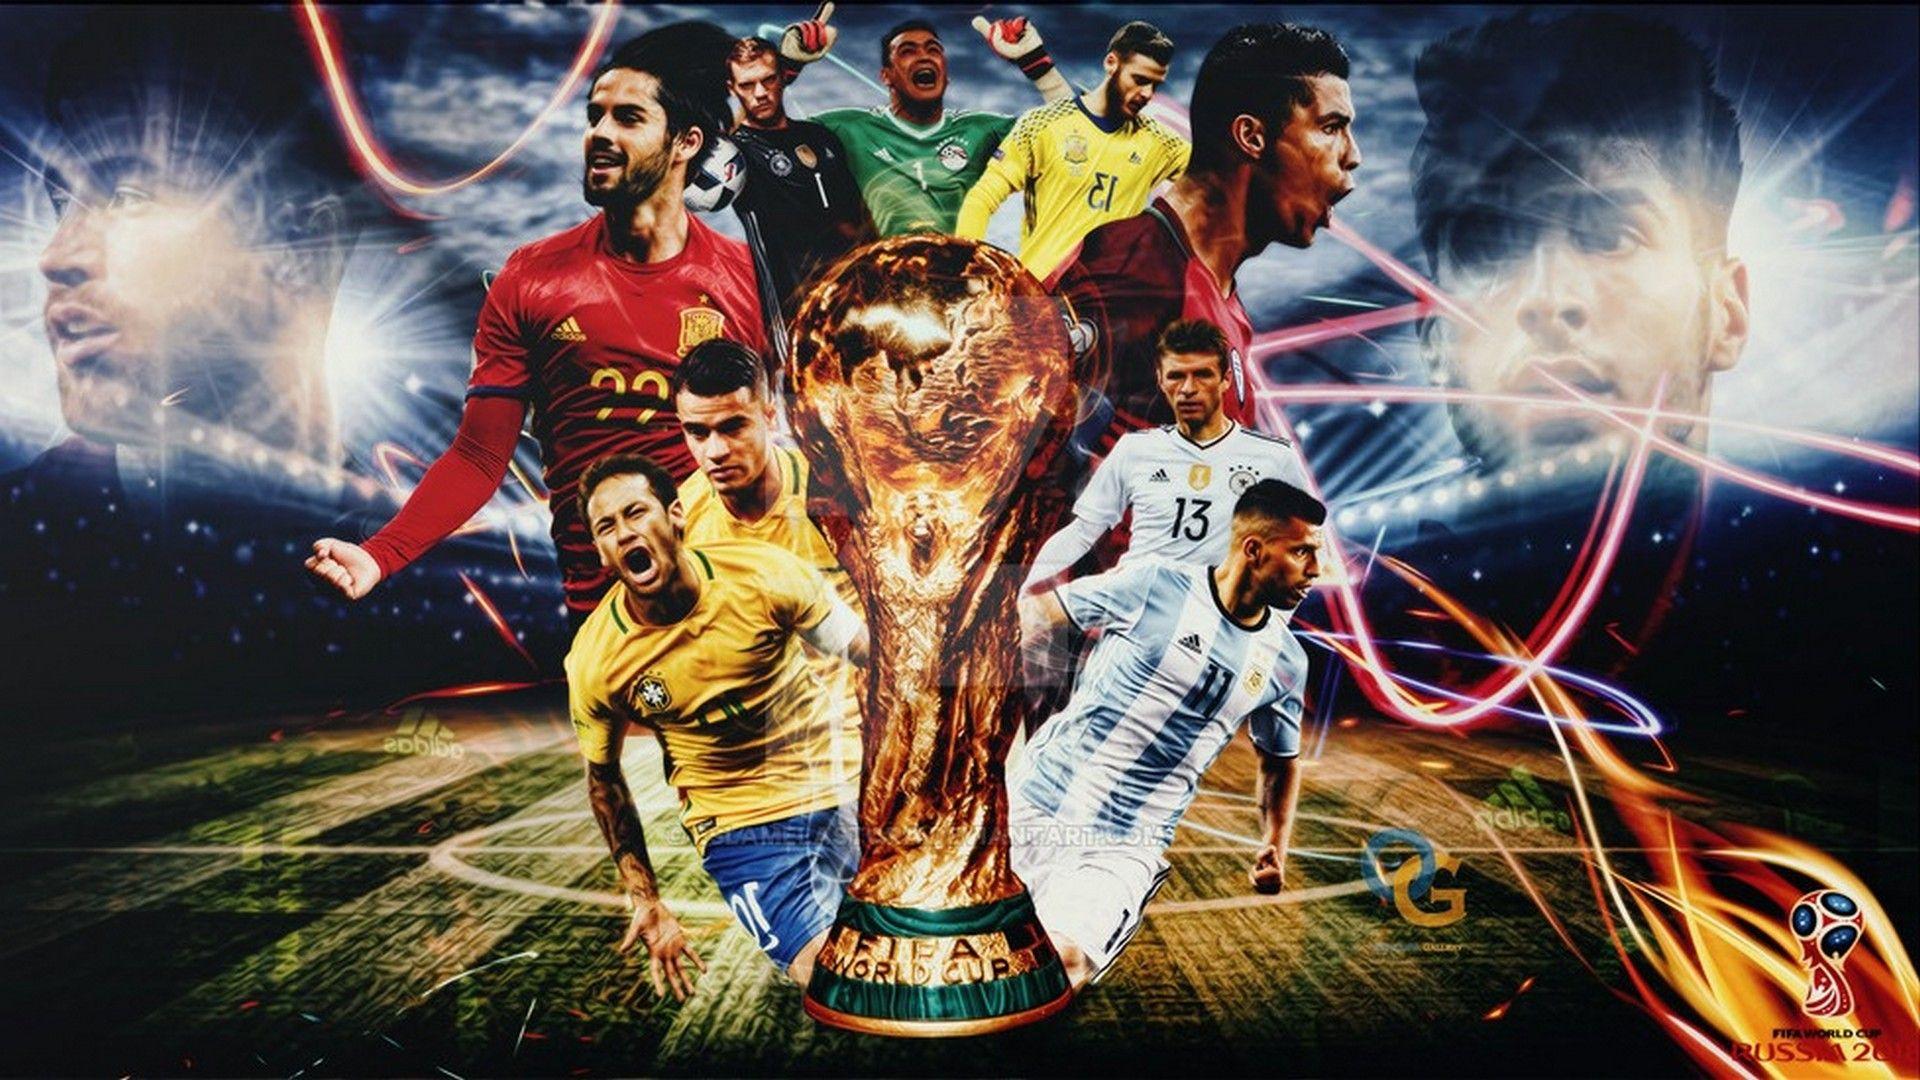 World Cup 2018 Wallpapers - Wallpaper Cave